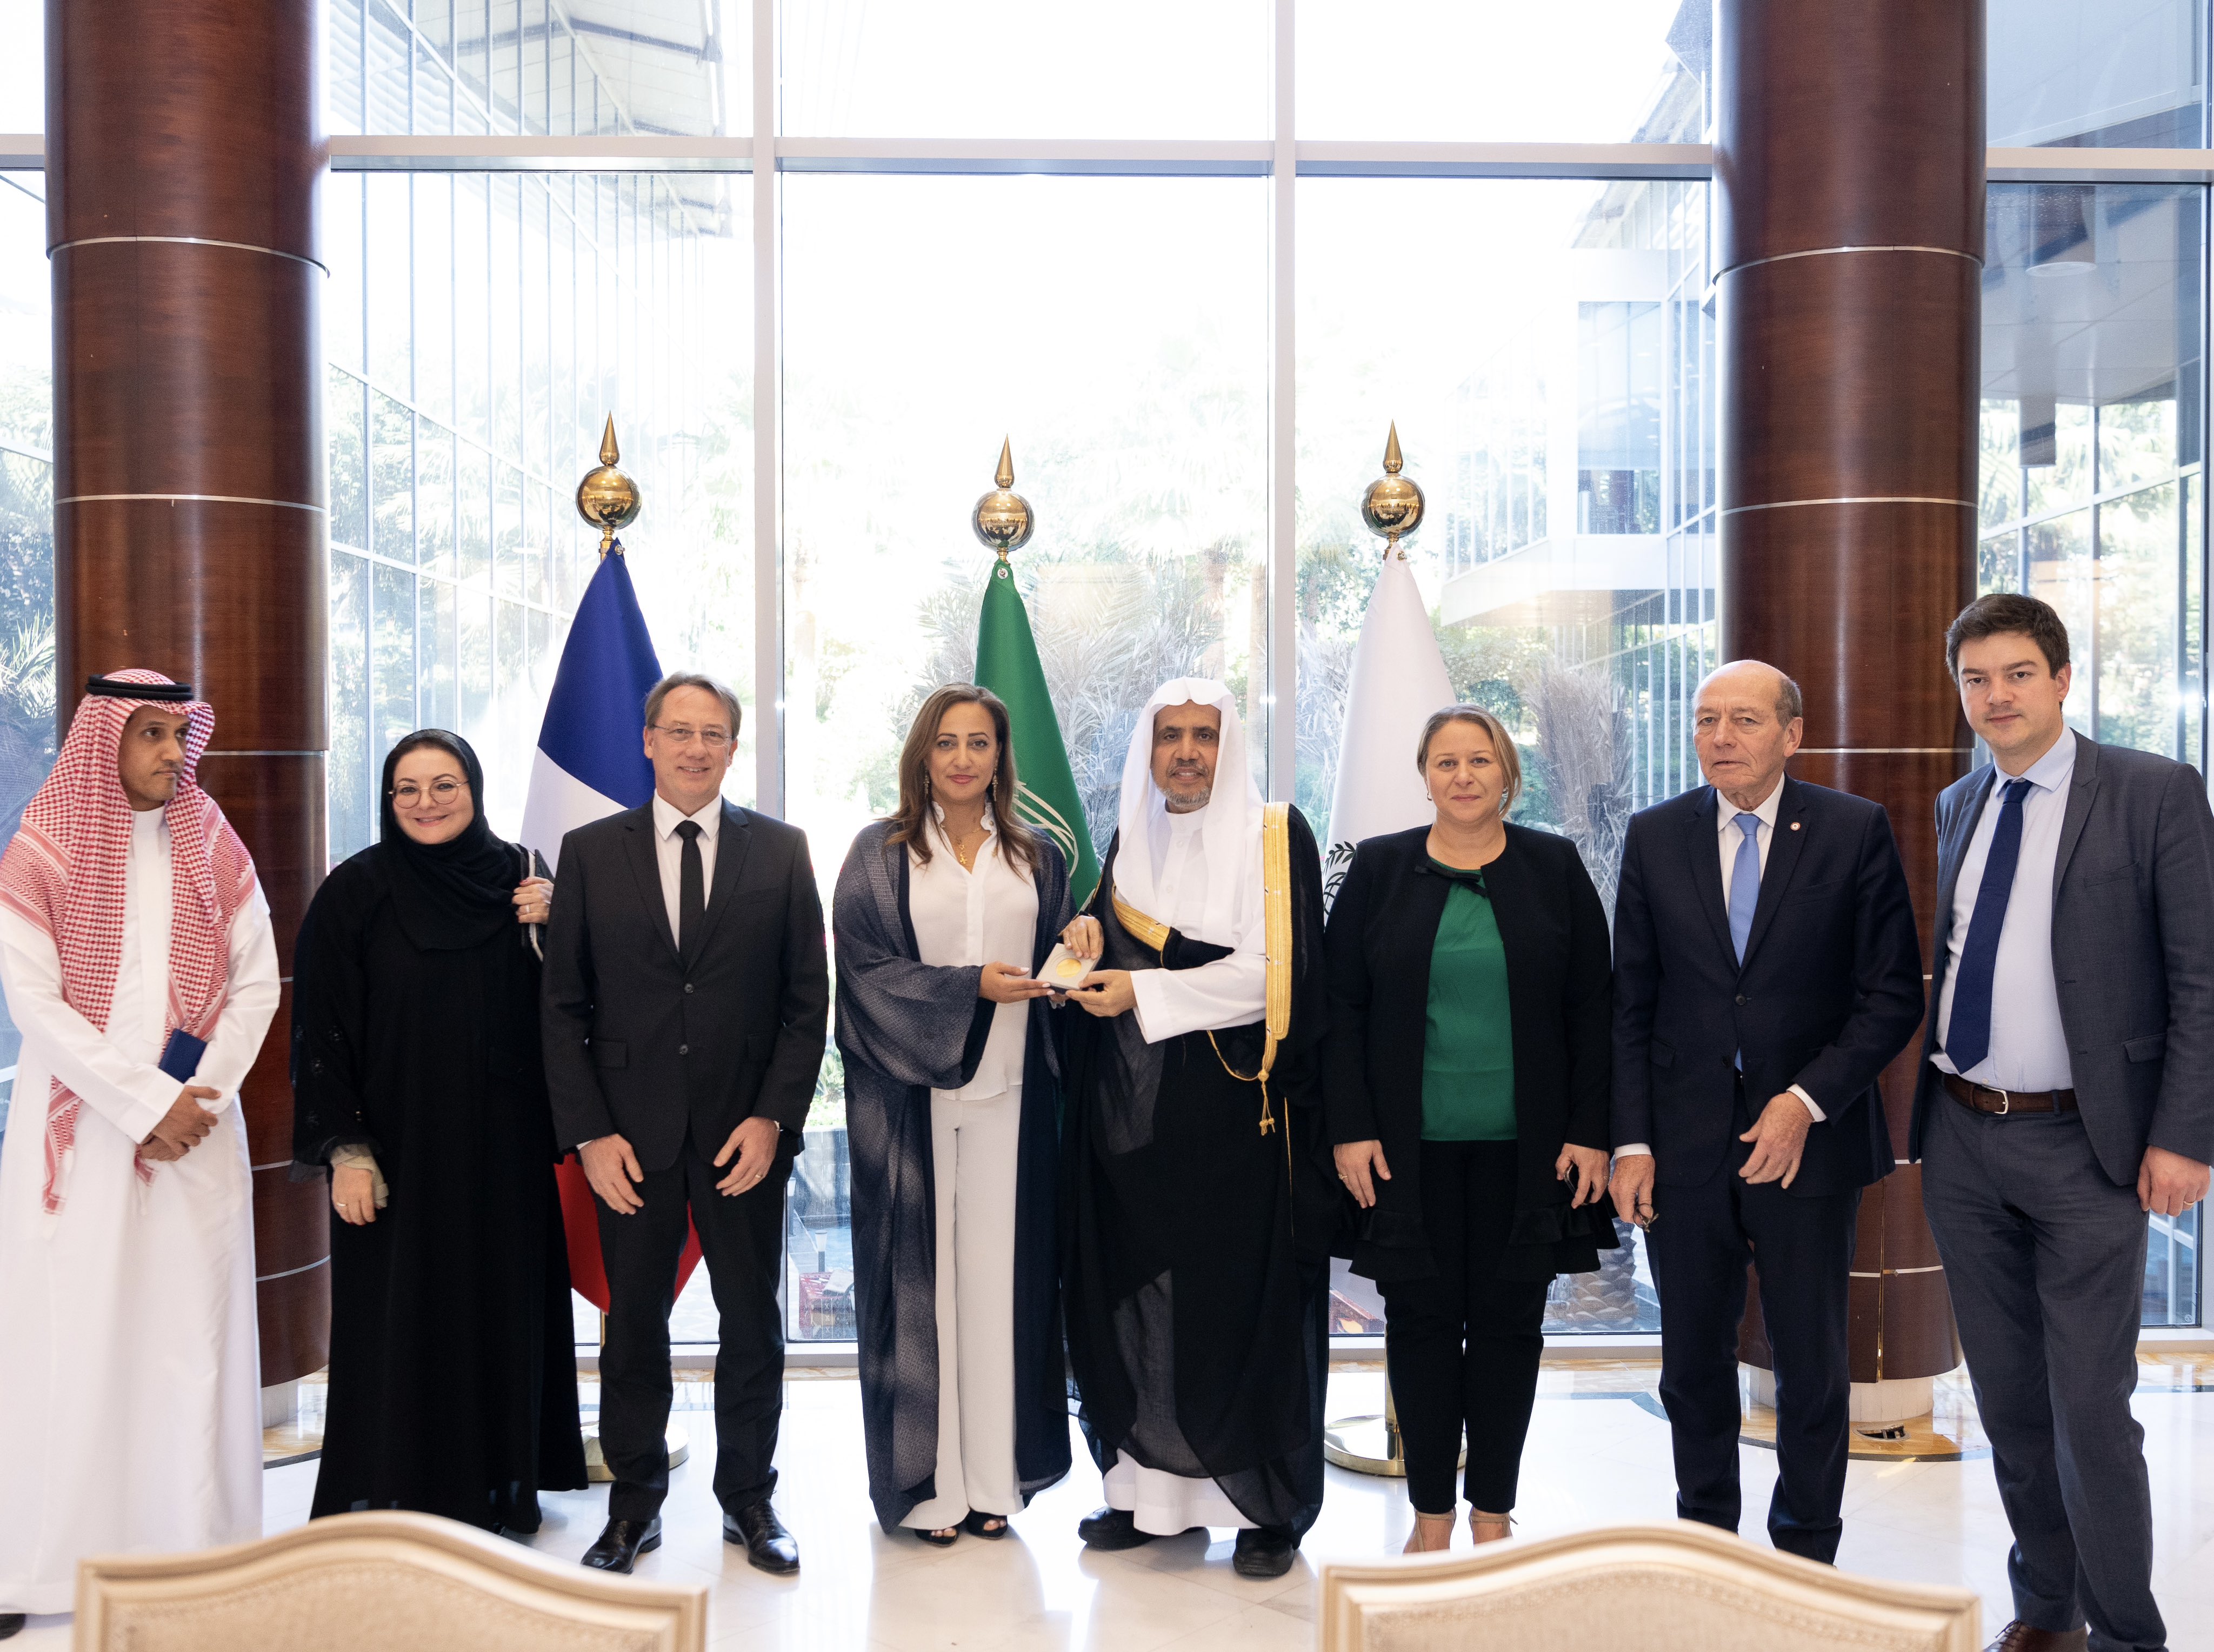 His Excellency Sheikh Dr. Mohammed Al-Issa, Secretary-General of the MWL and Chairman of the Organization of Muslim Scholars, met with a French parliamentary delegation